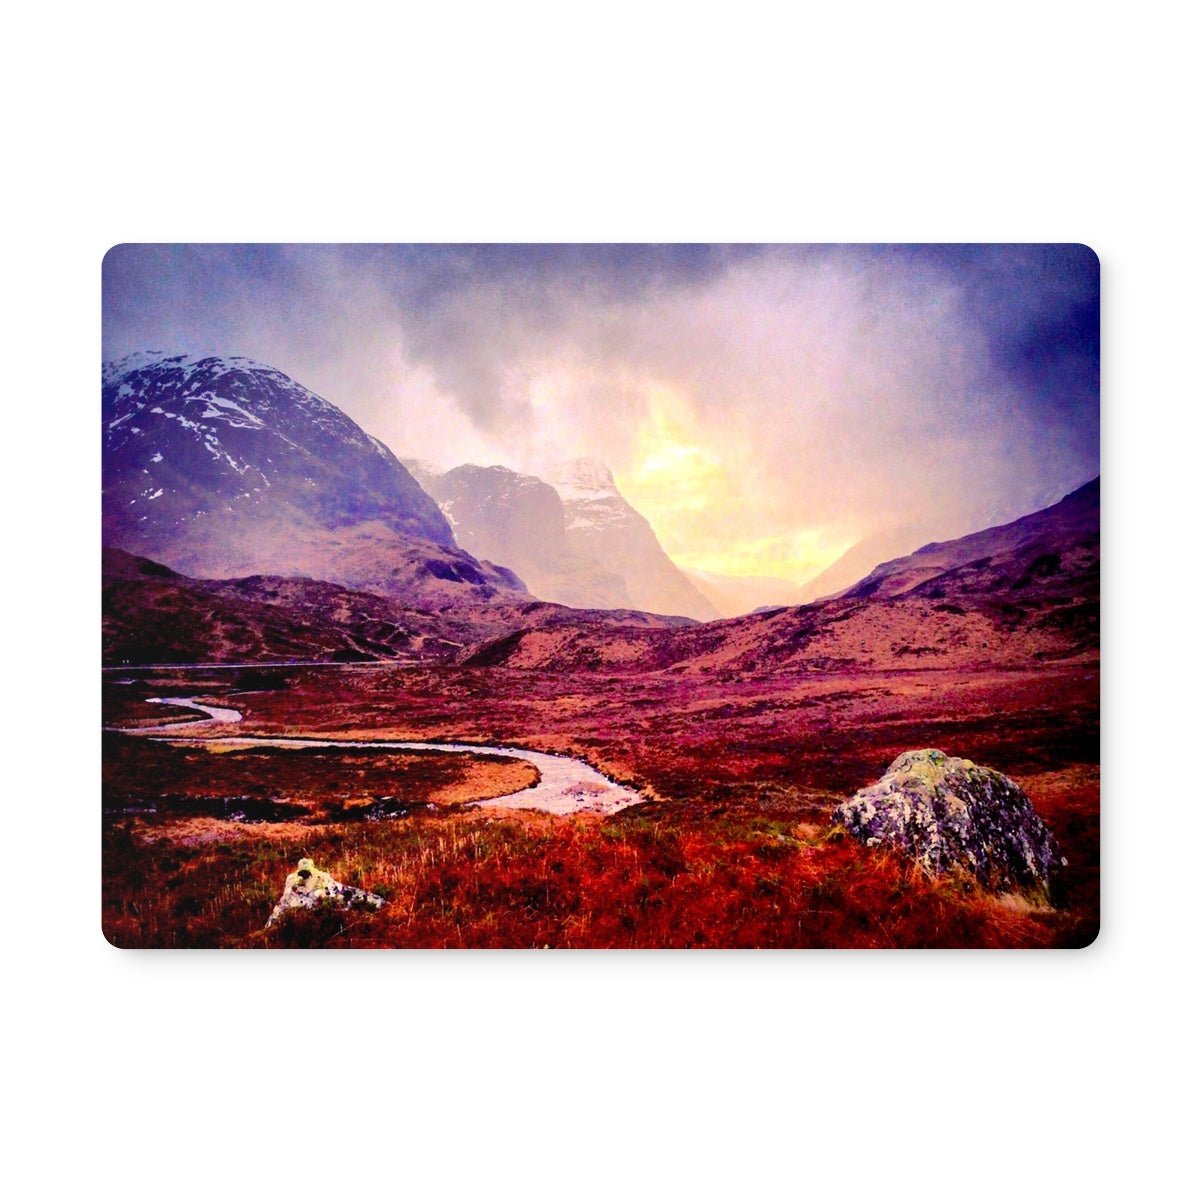 A Brooding Glencoe Art Gifts Placemat-Placemats-Glencoe Art Gallery-4 Placemats-Paintings, Prints, Homeware, Art Gifts From Scotland By Scottish Artist Kevin Hunter